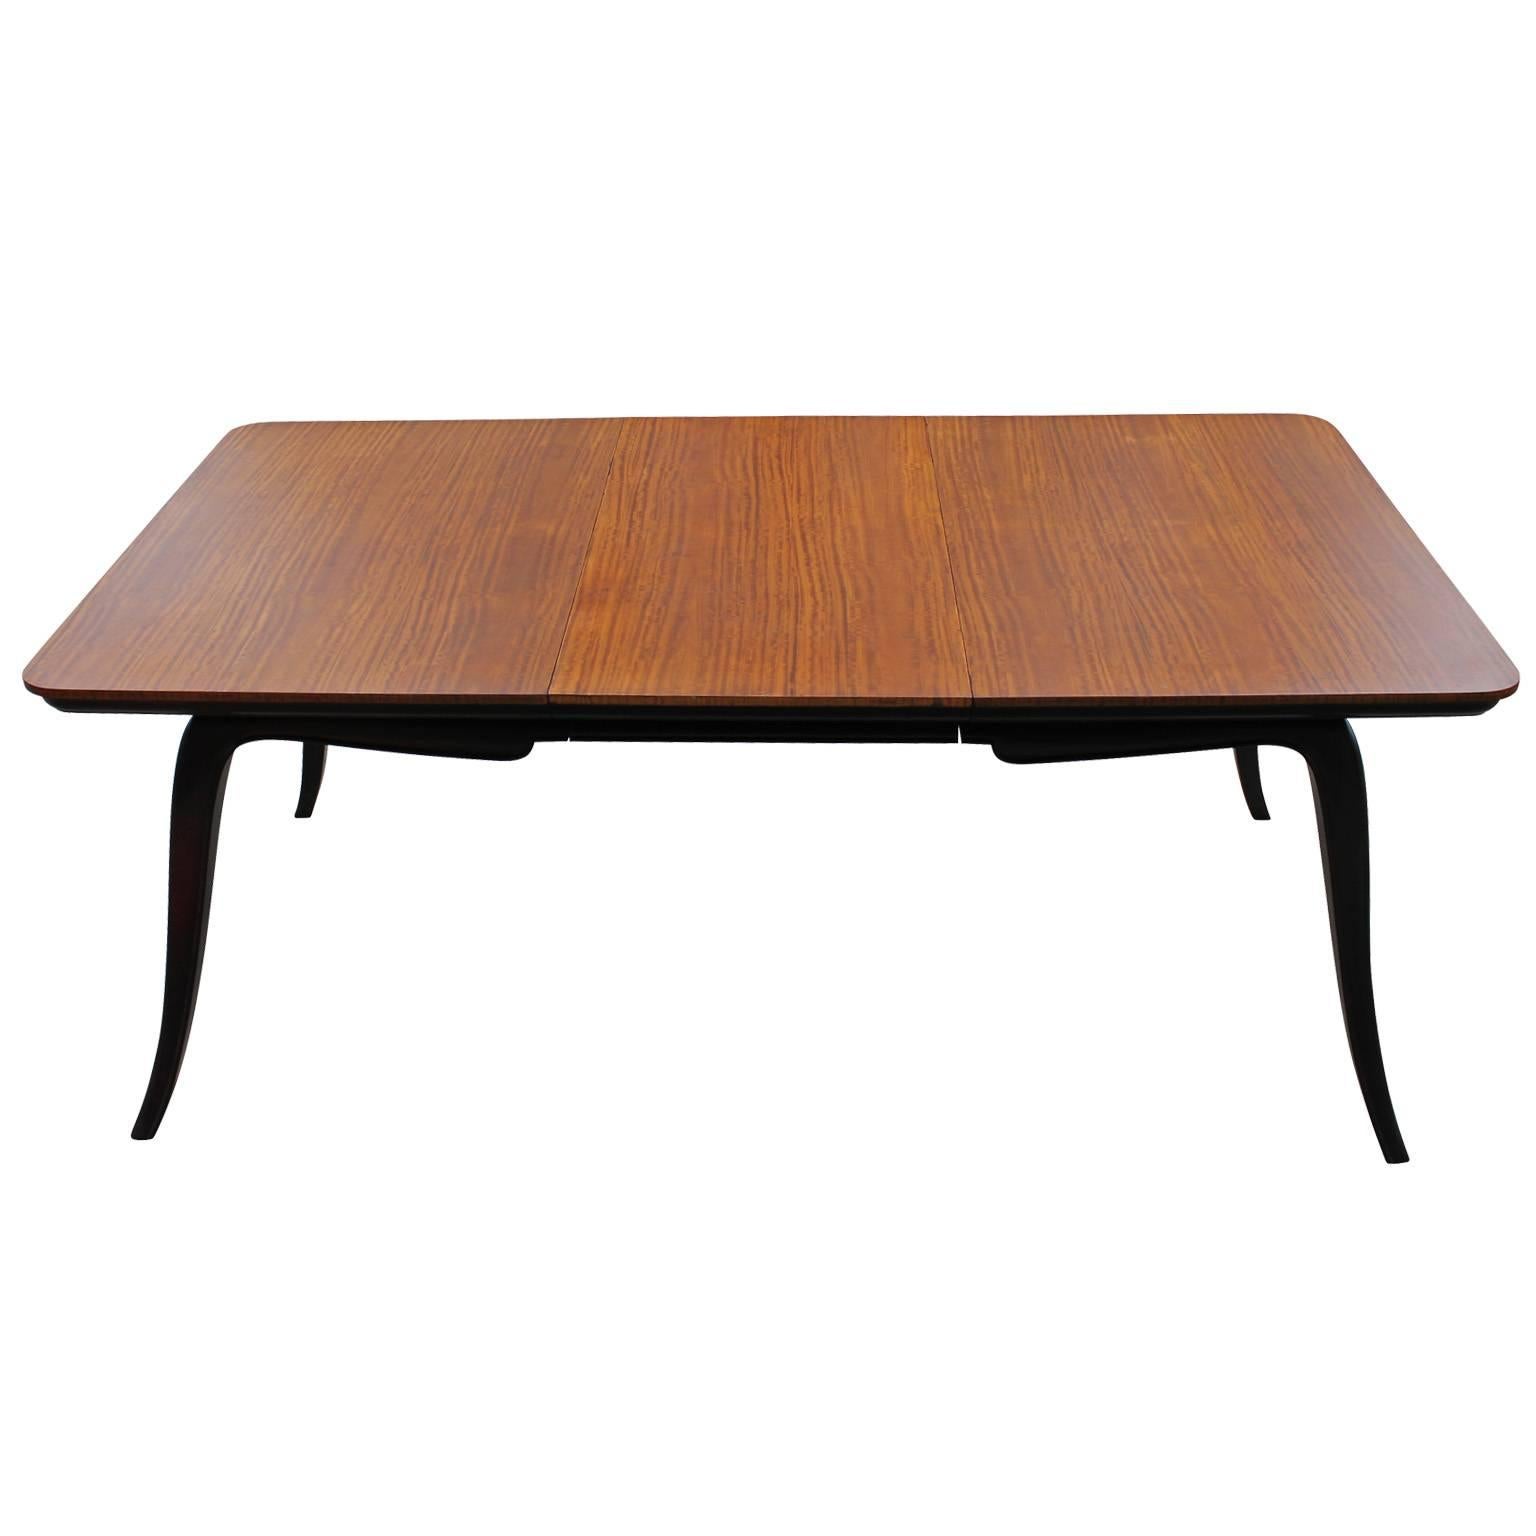 Mid-20th Century Sculptural Hollywood Regency Argentine Two-Tone Dining Table